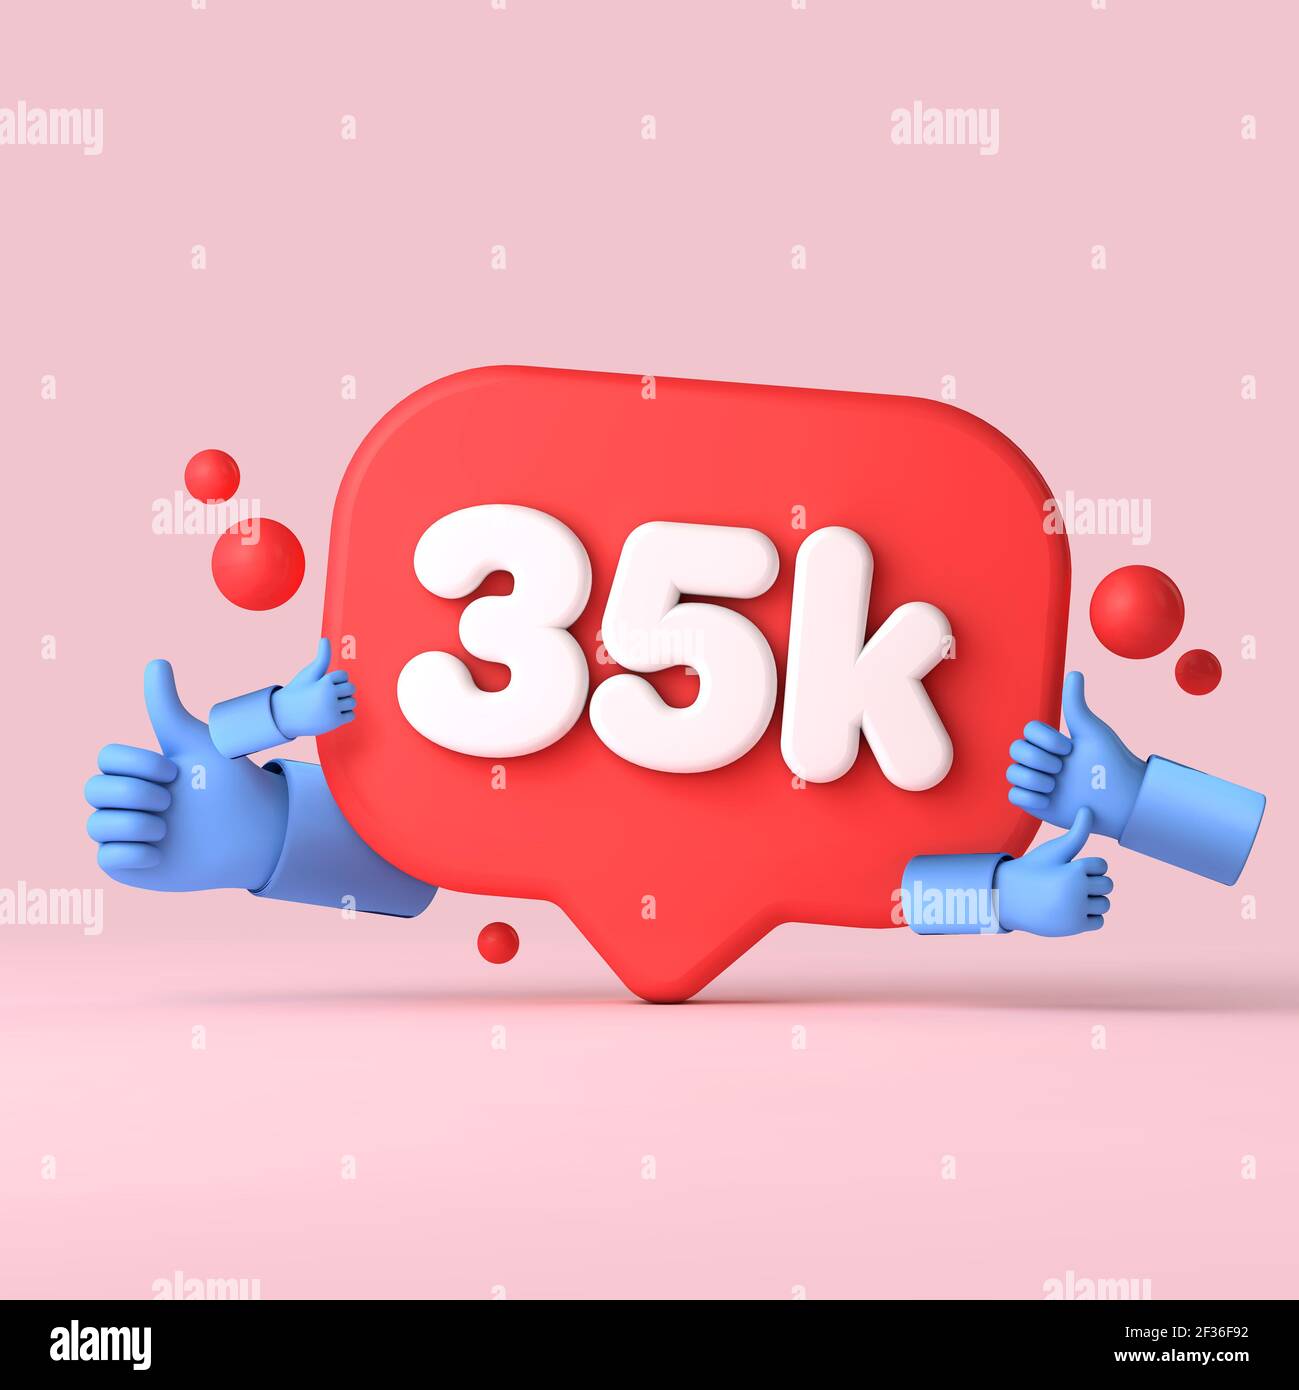 35 thousand followers social media banner thumbs up. 3D Rendering Stock Photo